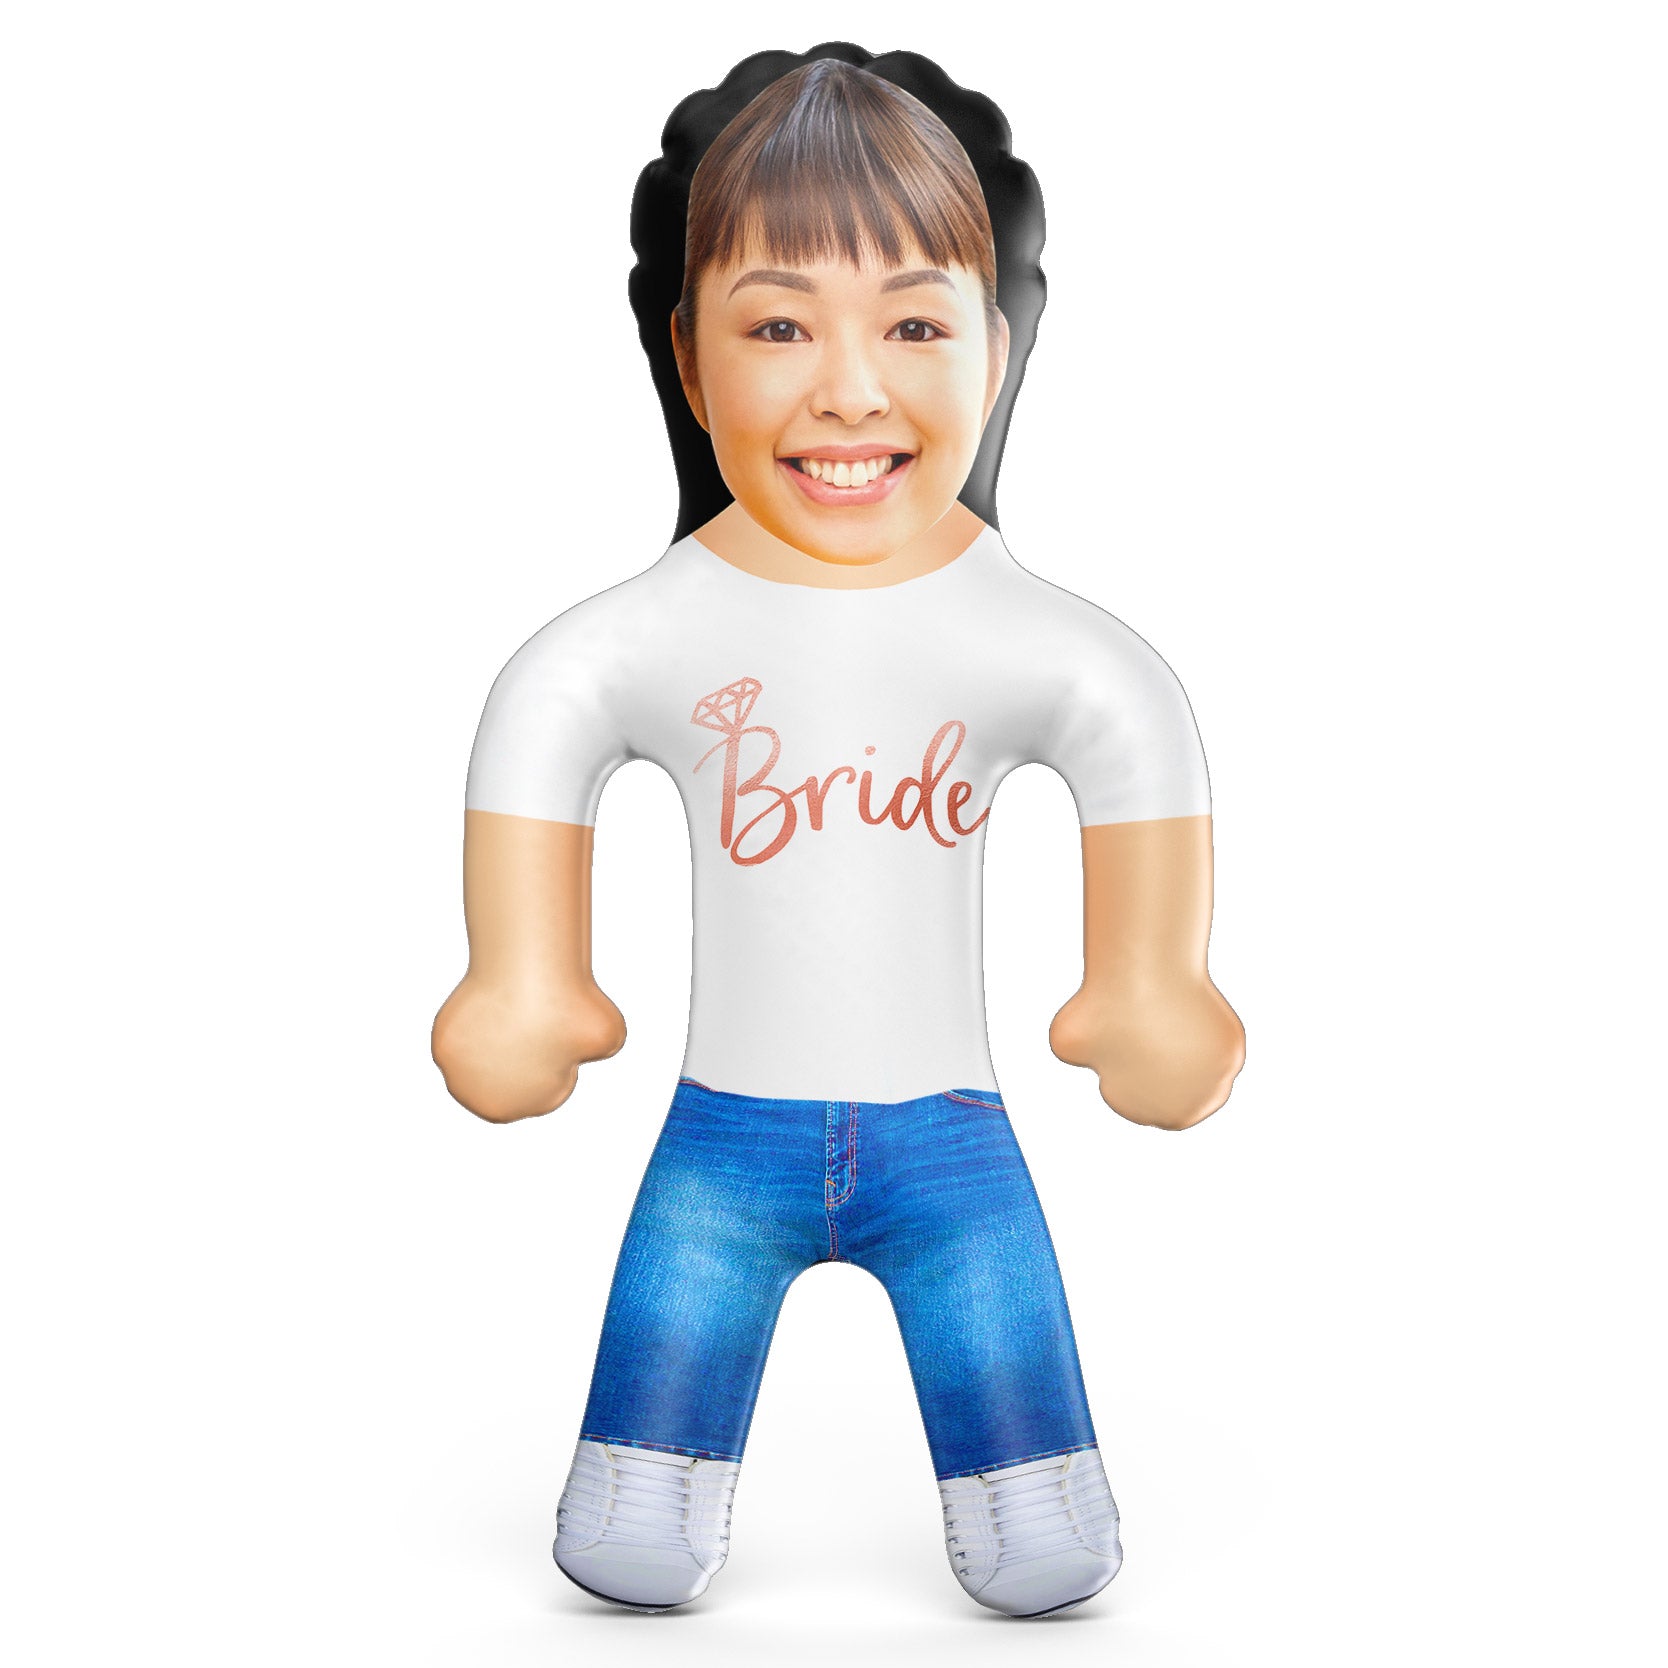 Bride T Shirt Inflatable Doll - Female Blow Up Doll